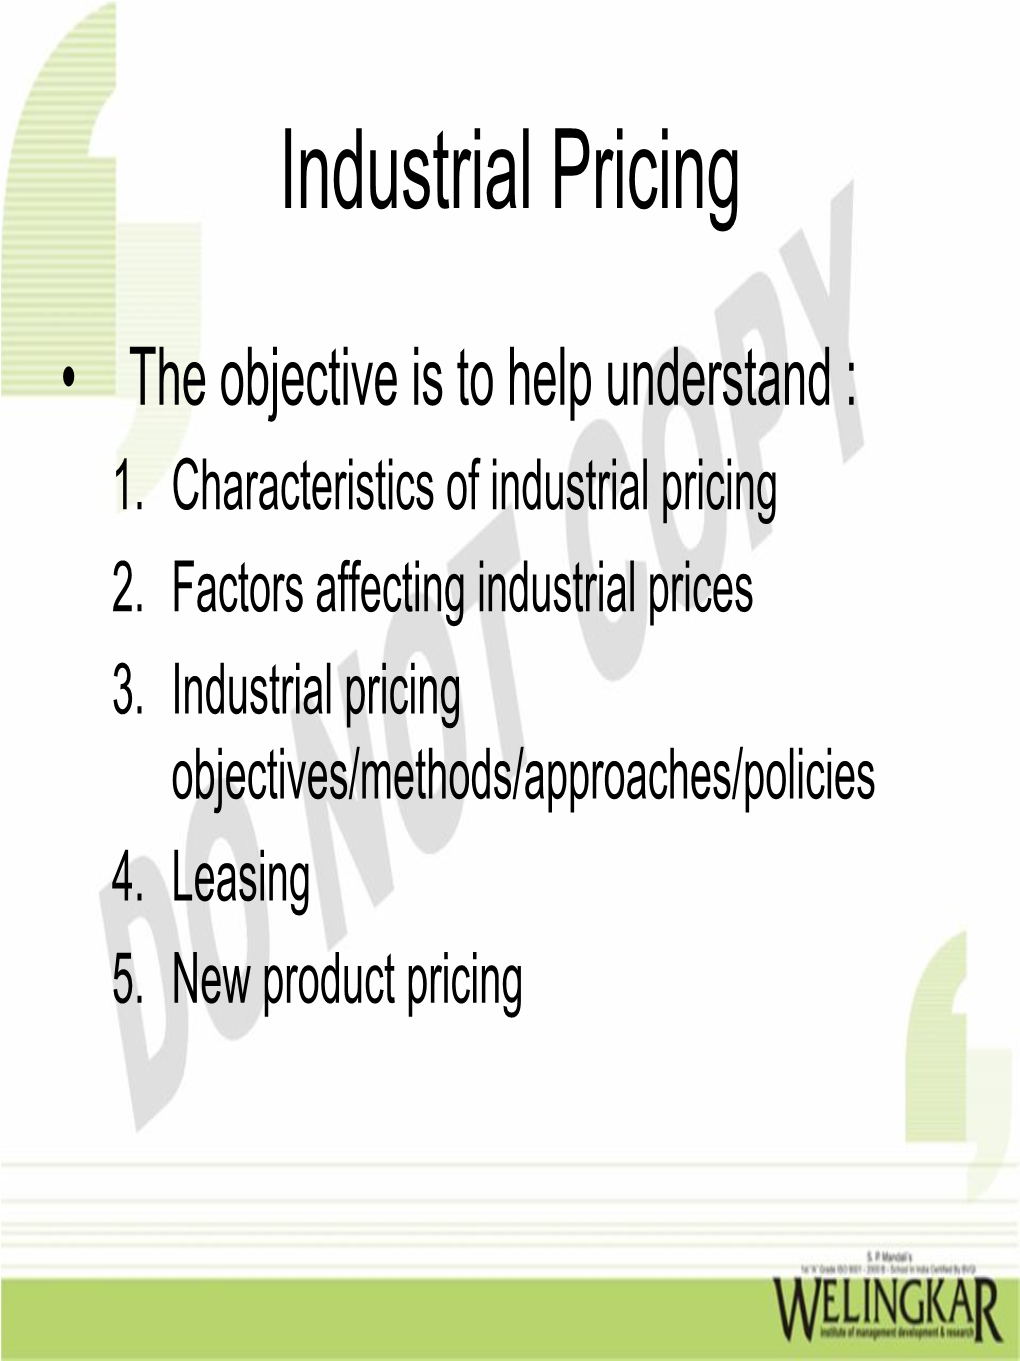 1. Characteristics of Industrial Pricing 2. Factors Affecting Industrial Prices 3